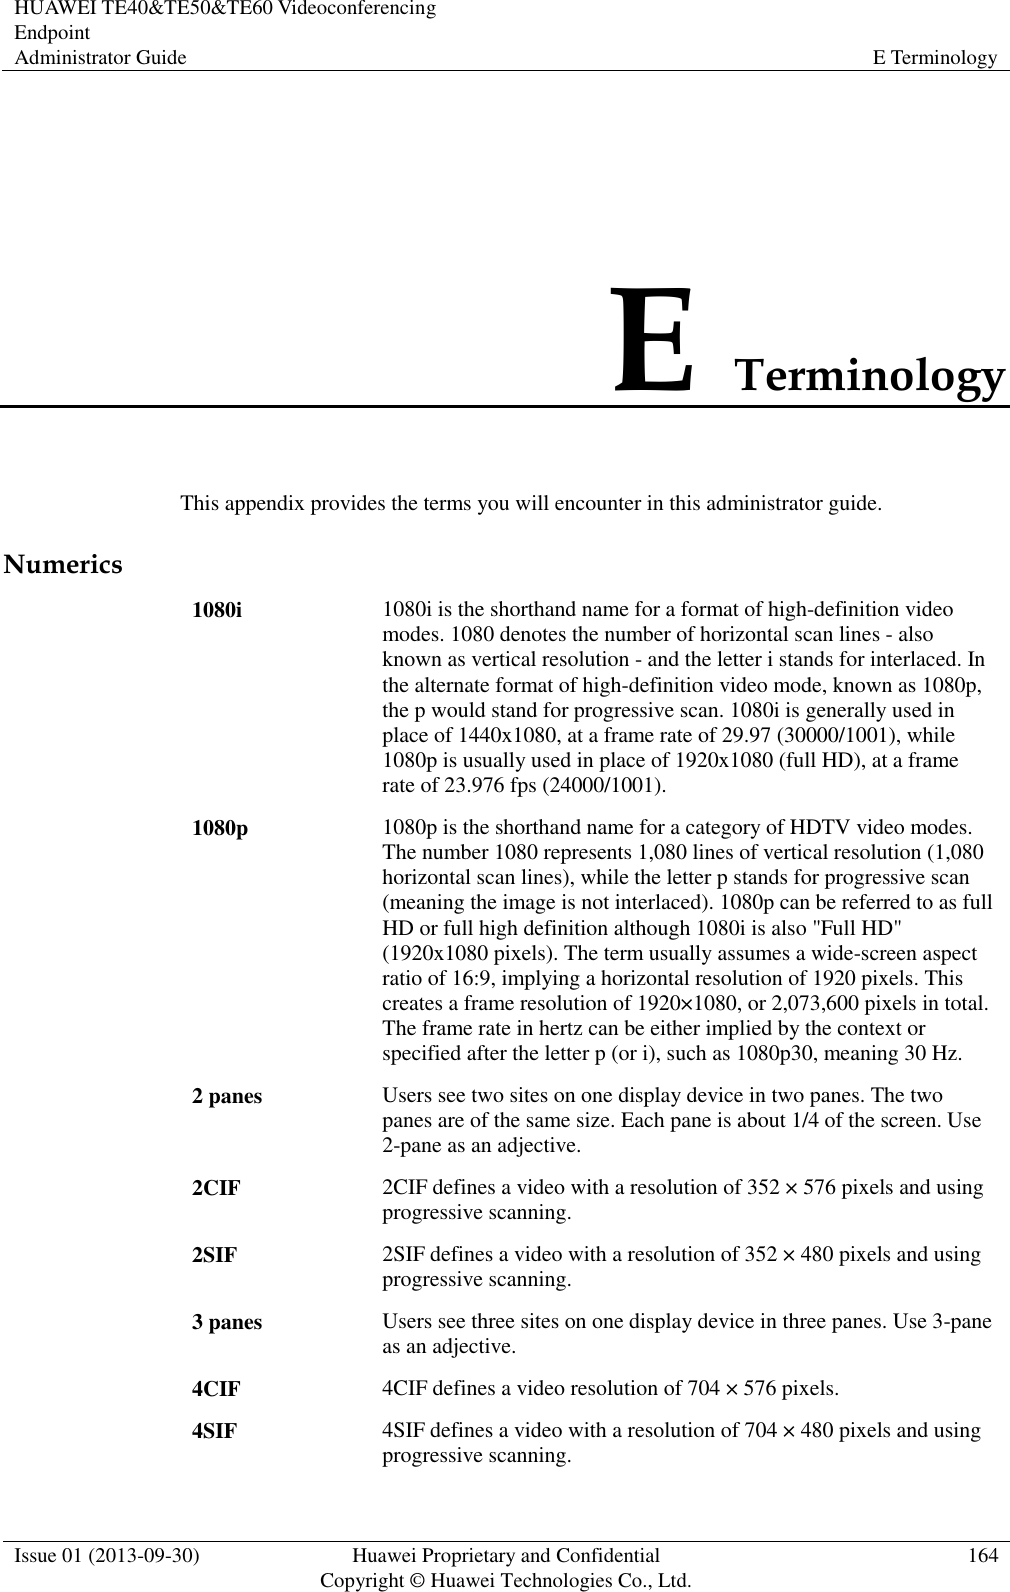 HUAWEI TE40&amp;TE50&amp;TE60 Videoconferencing Endpoint Administrator Guide E Terminology  Issue 01 (2013-09-30) Huawei Proprietary and Confidential                                     Copyright © Huawei Technologies Co., Ltd. 164  E Terminology This appendix provides the terms you will encounter in this administrator guide. Numerics 1080i 1080i is the shorthand name for a format of high-definition video modes. 1080 denotes the number of horizontal scan lines - also known as vertical resolution - and the letter i stands for interlaced. In the alternate format of high-definition video mode, known as 1080p, the p would stand for progressive scan. 1080i is generally used in place of 1440x1080, at a frame rate of 29.97 (30000/1001), while 1080p is usually used in place of 1920x1080 (full HD), at a frame rate of 23.976 fps (24000/1001). 1080p 1080p is the shorthand name for a category of HDTV video modes. The number 1080 represents 1,080 lines of vertical resolution (1,080 horizontal scan lines), while the letter p stands for progressive scan (meaning the image is not interlaced). 1080p can be referred to as full HD or full high definition although 1080i is also &quot;Full HD&quot; (1920x1080 pixels). The term usually assumes a wide-screen aspect ratio of 16:9, implying a horizontal resolution of 1920 pixels. This creates a frame resolution of 1920×1080, or 2,073,600 pixels in total. The frame rate in hertz can be either implied by the context or specified after the letter p (or i), such as 1080p30, meaning 30 Hz. 2 panes Users see two sites on one display device in two panes. The two panes are of the same size. Each pane is about 1/4 of the screen. Use 2-pane as an adjective. 2CIF 2CIF defines a video with a resolution of 352 × 576 pixels and using progressive scanning. 2SIF 2SIF defines a video with a resolution of 352 × 480 pixels and using progressive scanning. 3 panes Users see three sites on one display device in three panes. Use 3-pane as an adjective. 4CIF 4CIF defines a video resolution of 704 × 576 pixels. 4SIF 4SIF defines a video with a resolution of 704 × 480 pixels and using progressive scanning. 